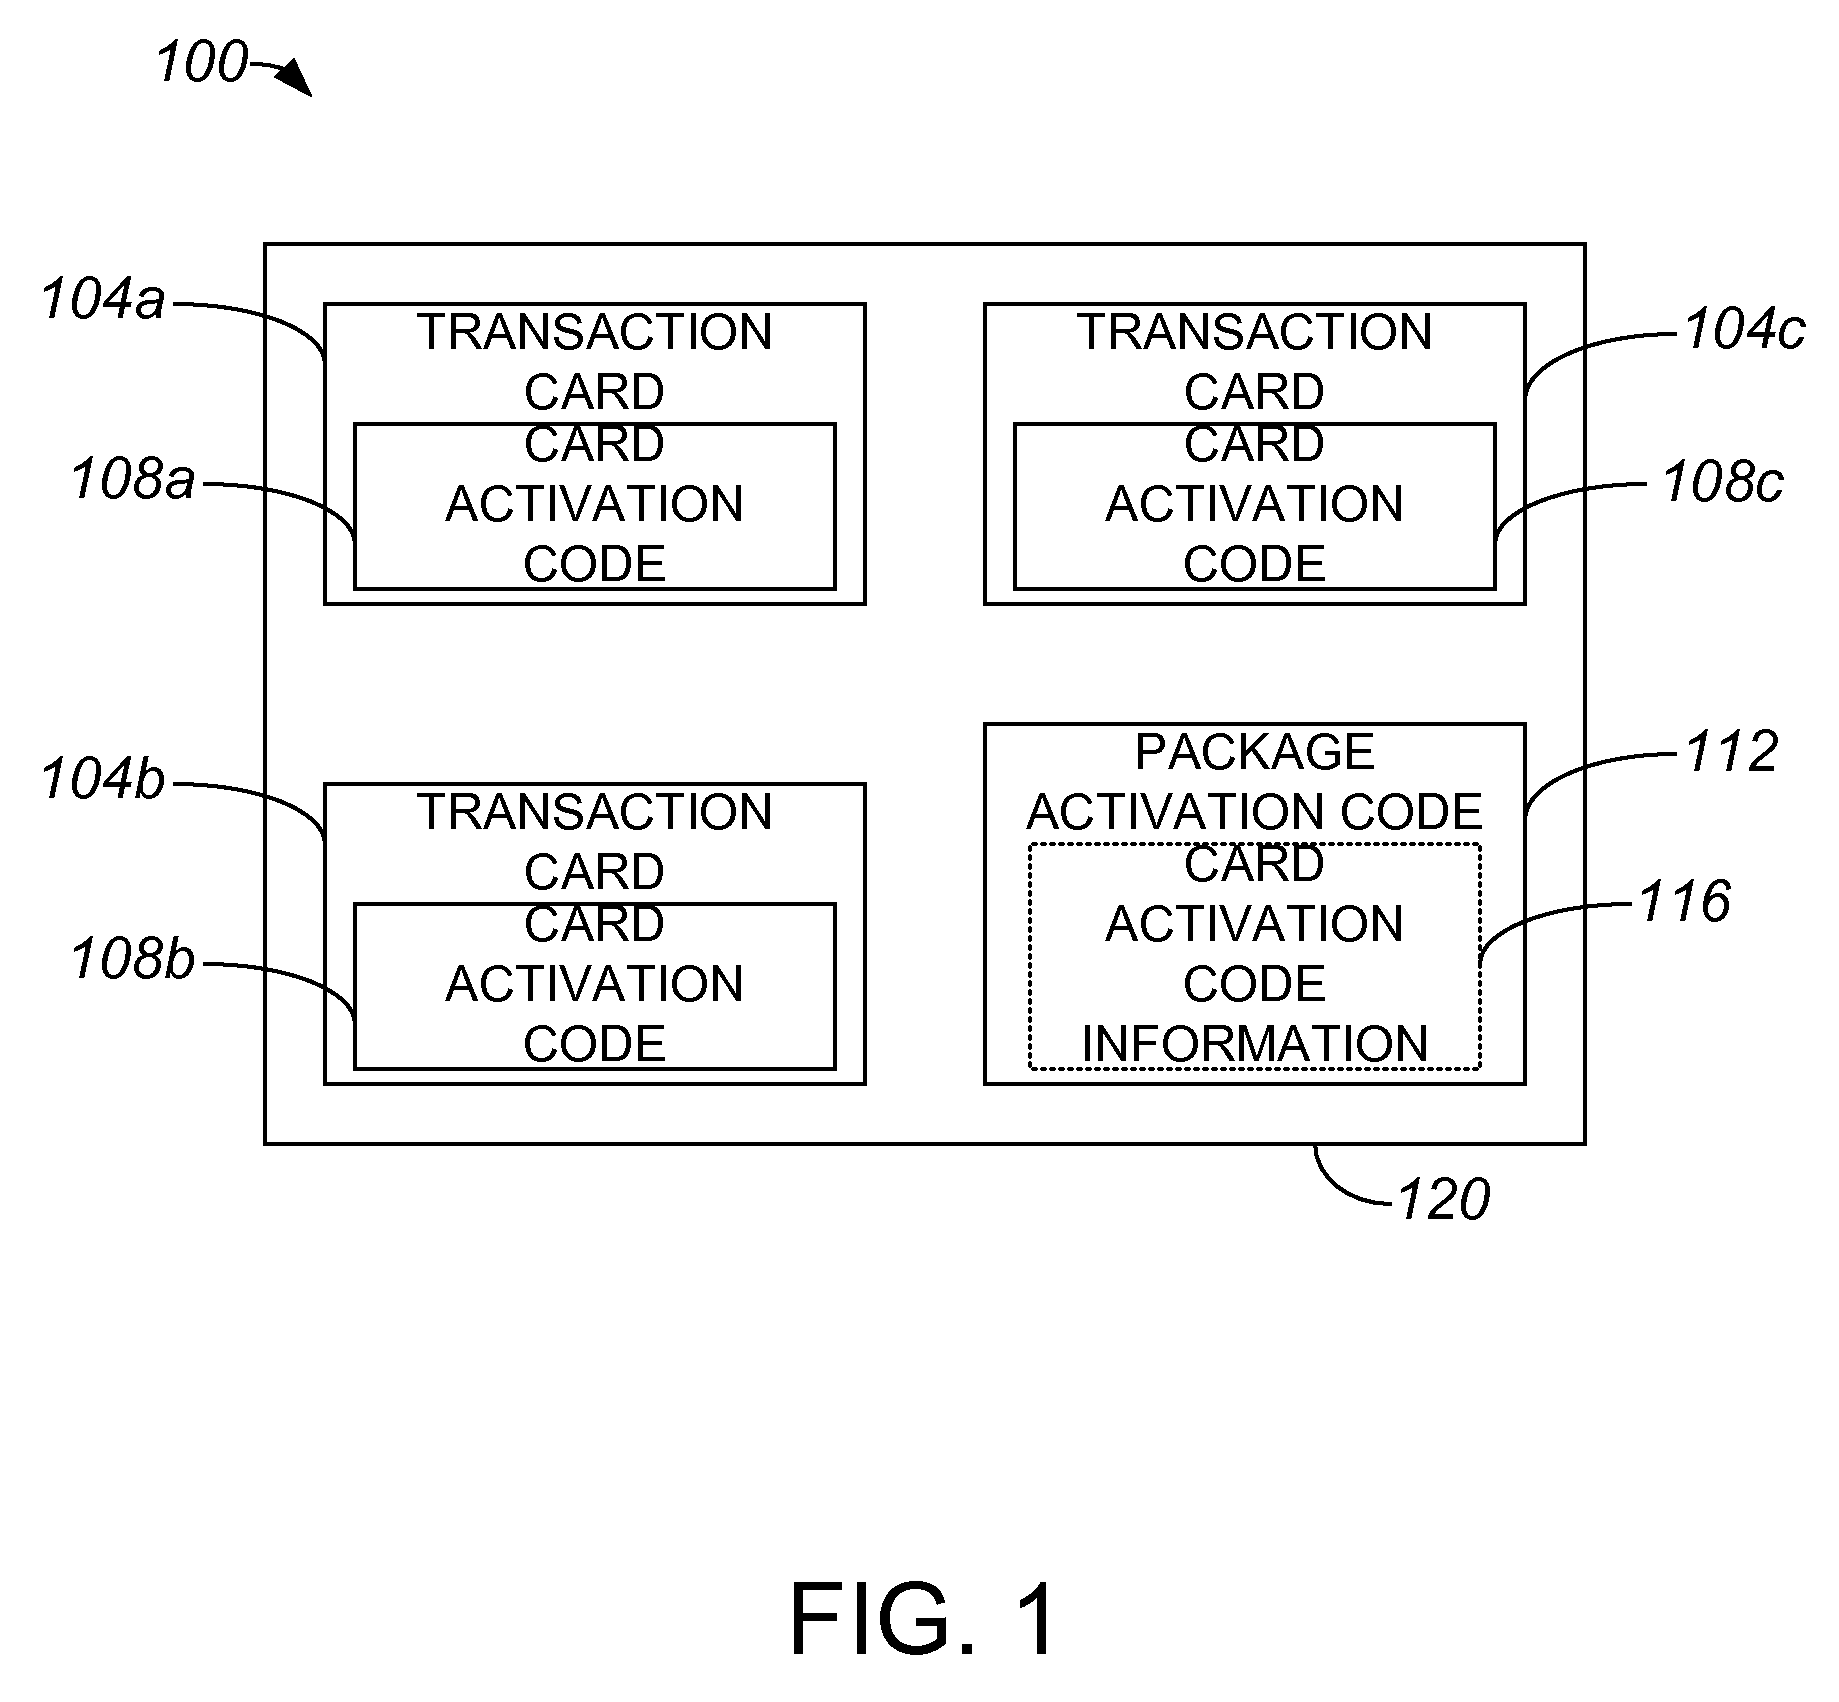 Method for Assembling and Activating a Multi-Pack Package of Transaction Cards